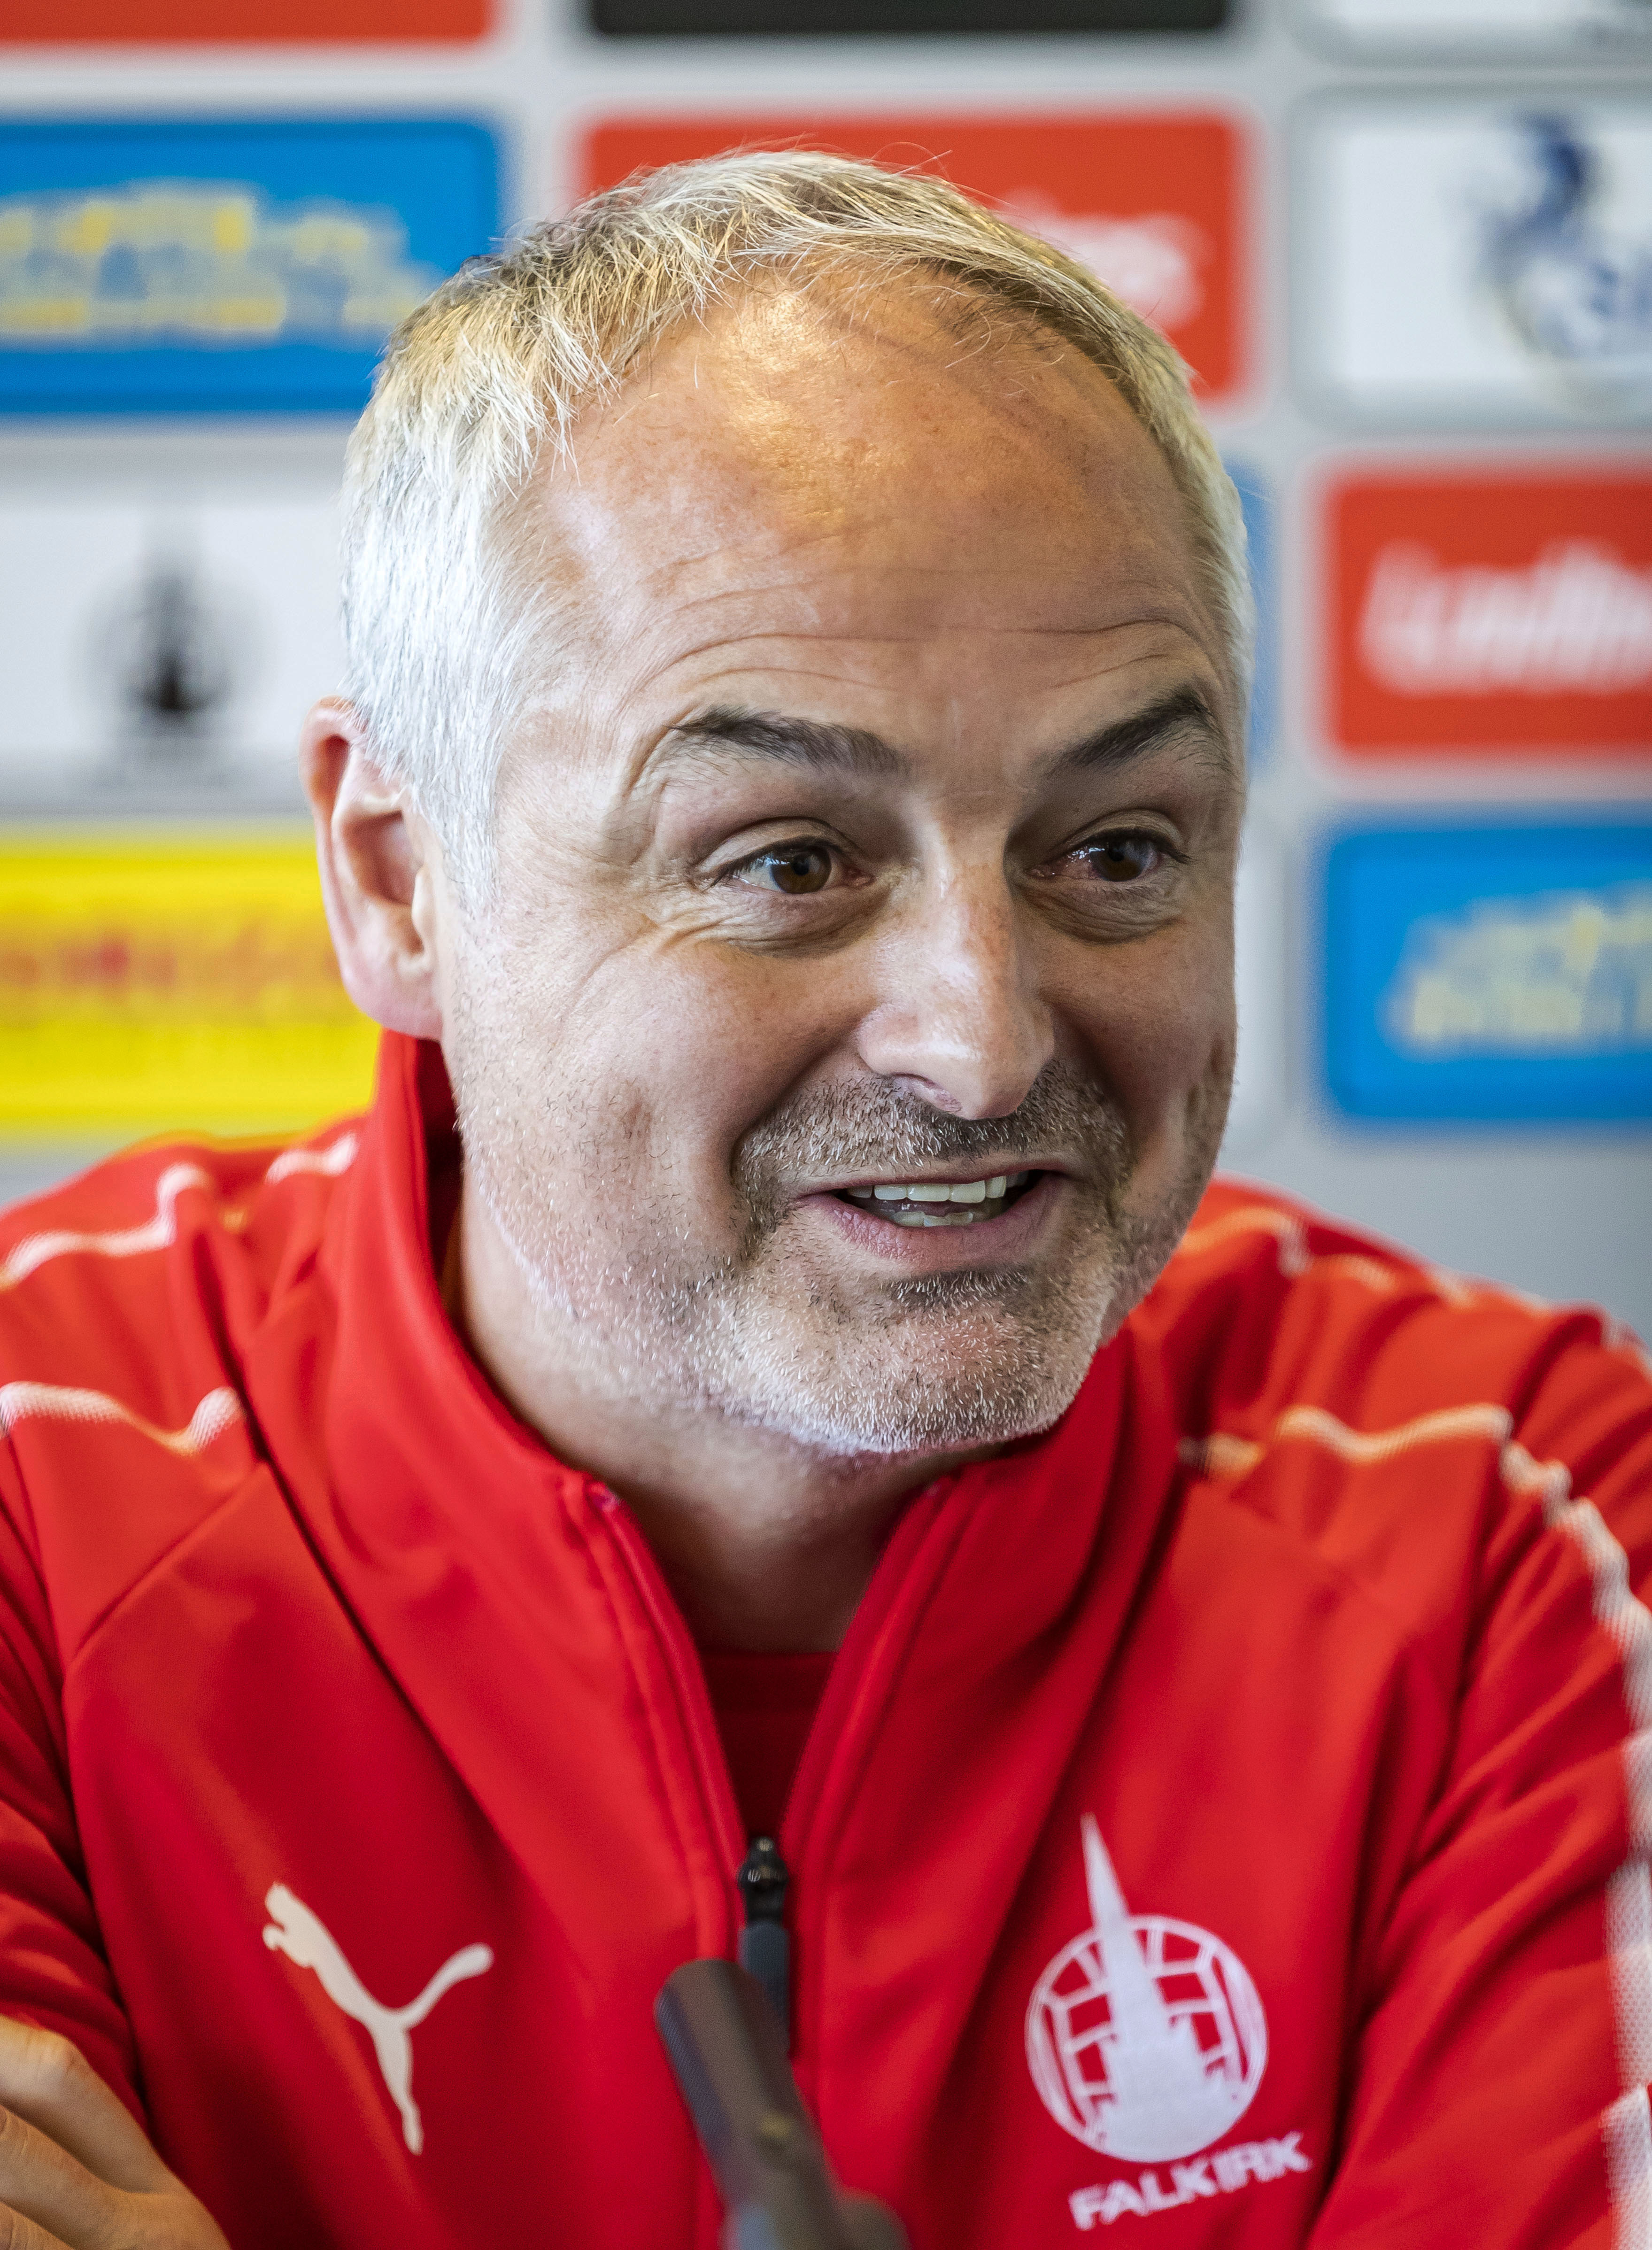 04/09/2018
 FALKIRK STADIUM - FALKIRK
 Ray McKinnon officially unveiled as the new Falkirk manager.